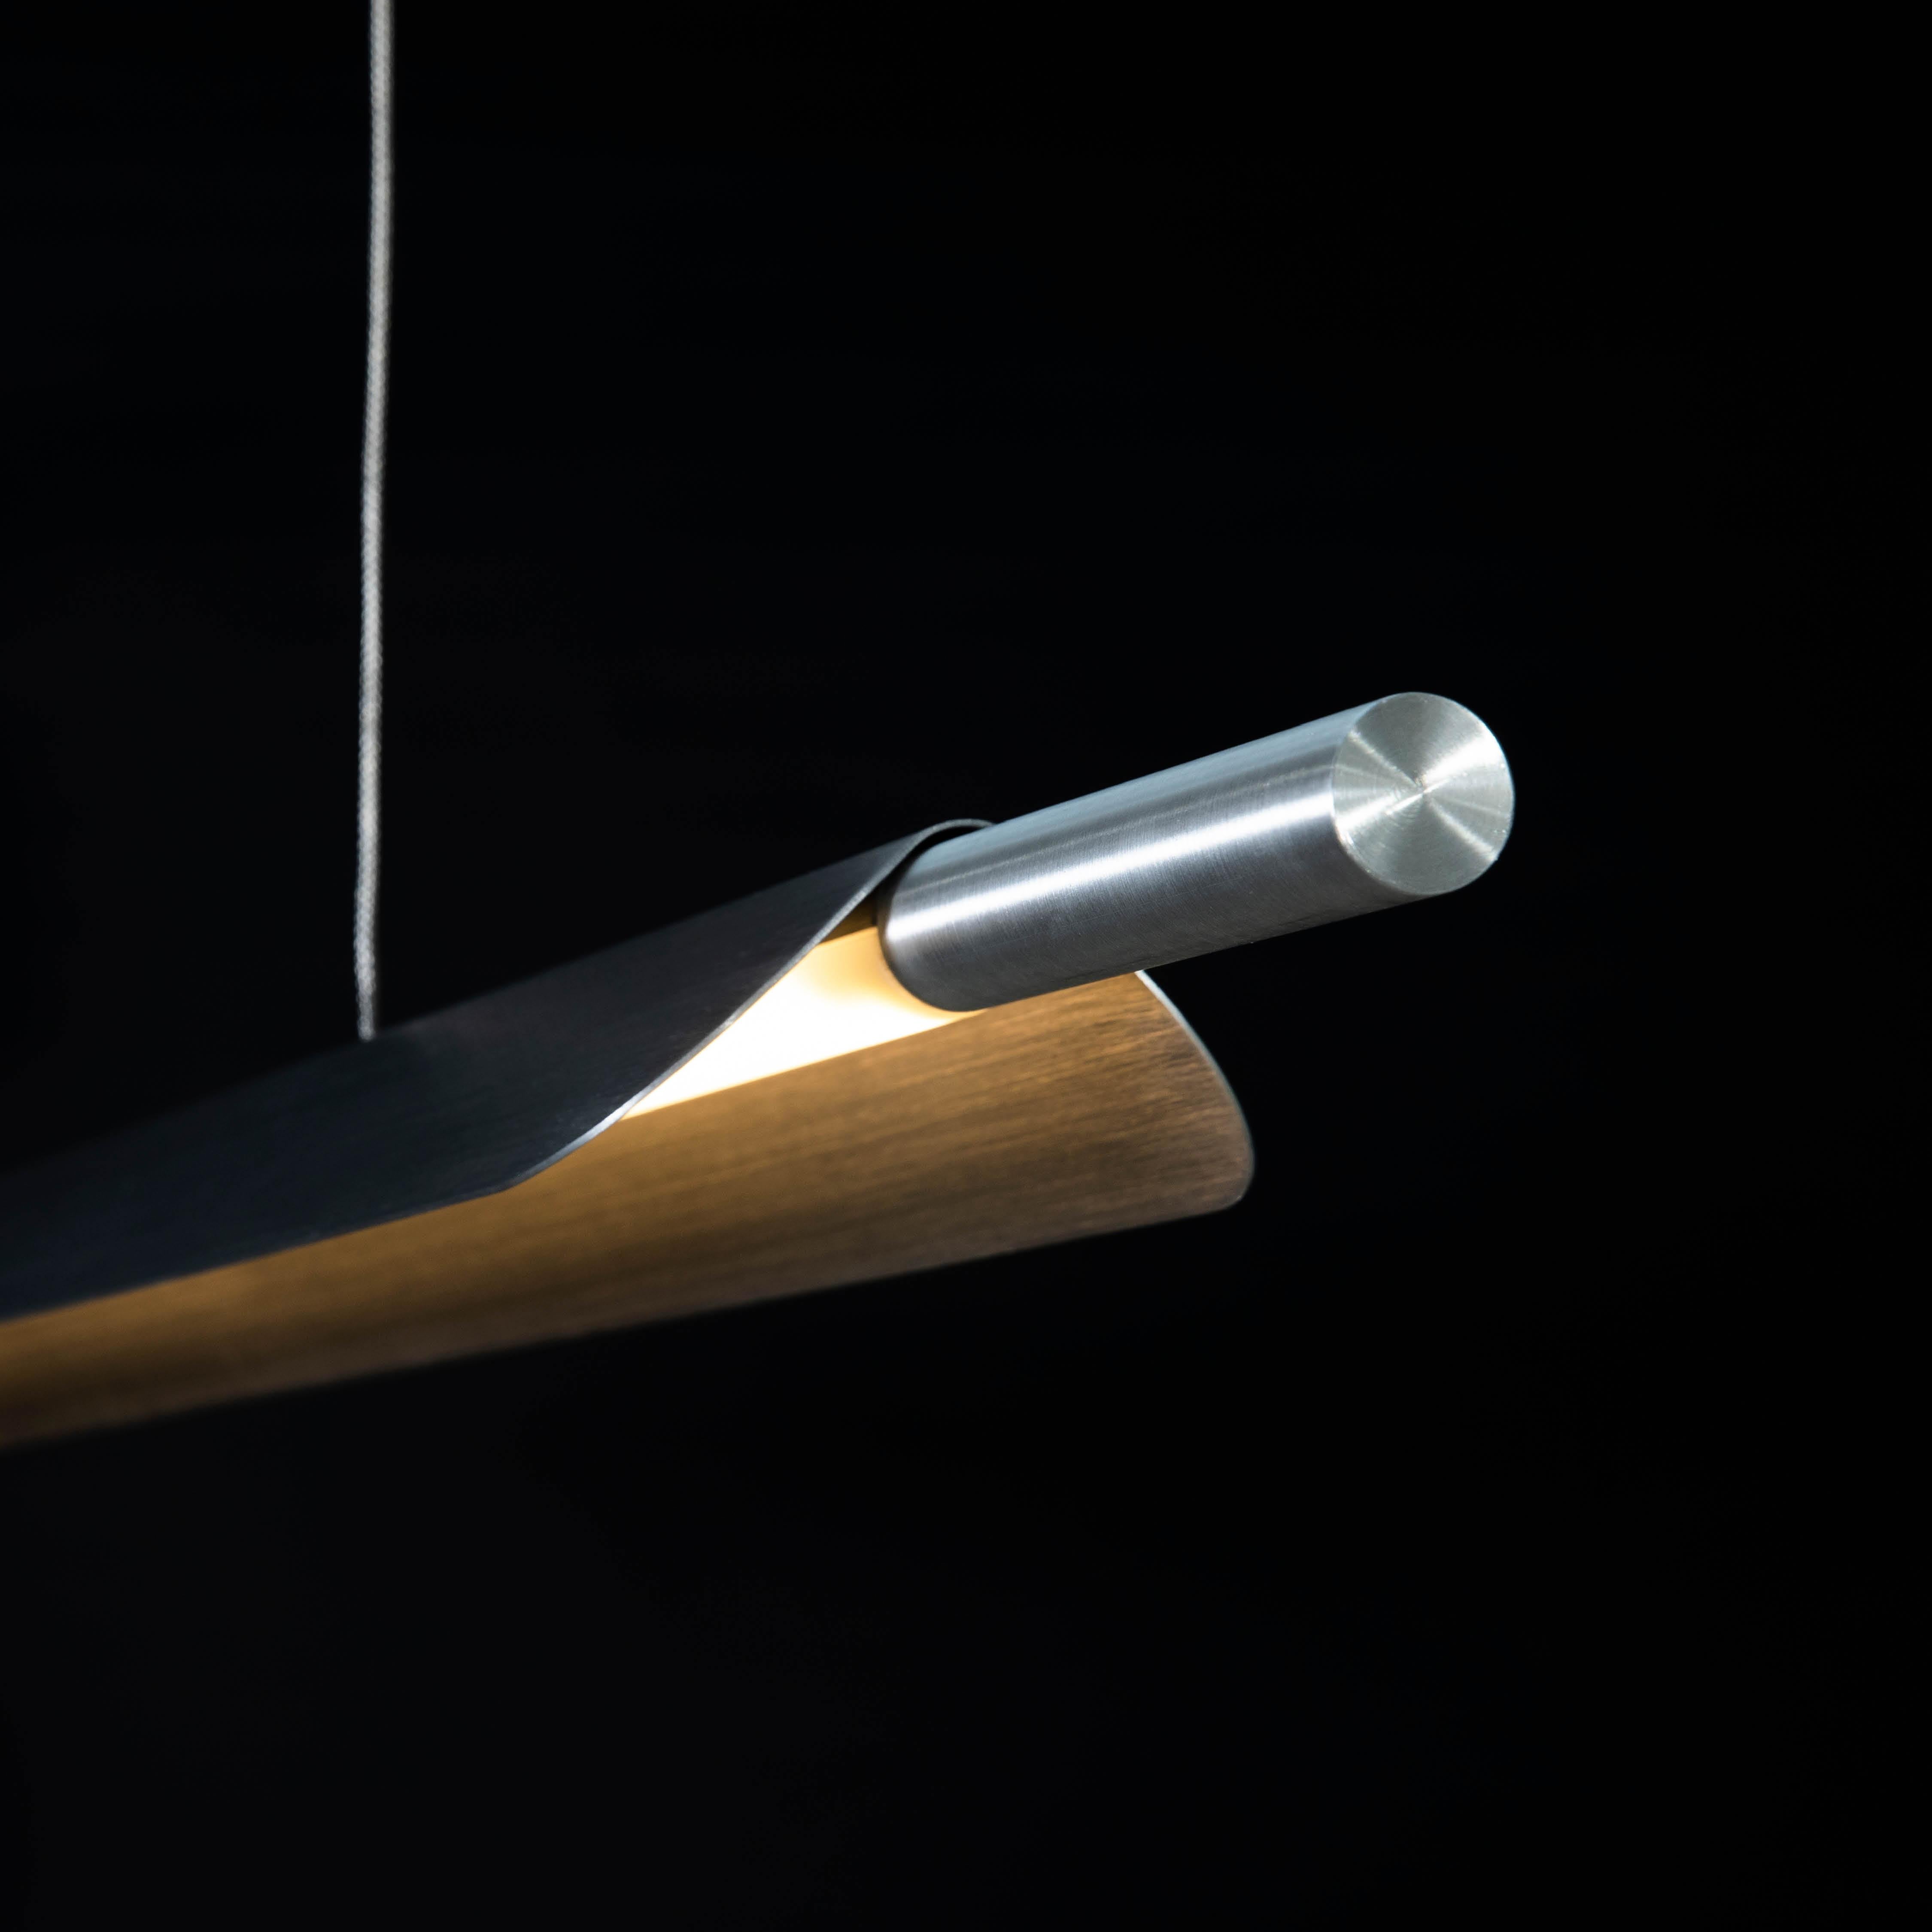 ‘Heavy Metal’ by B-TD. A new series of hand-brushed satin finishes highlighting the elemental beauty of raw metal. 

Formation linear pendant is a sleek, luxurious fixture ideally suited to hang above Kitchen islands, dining tables, workspaces,